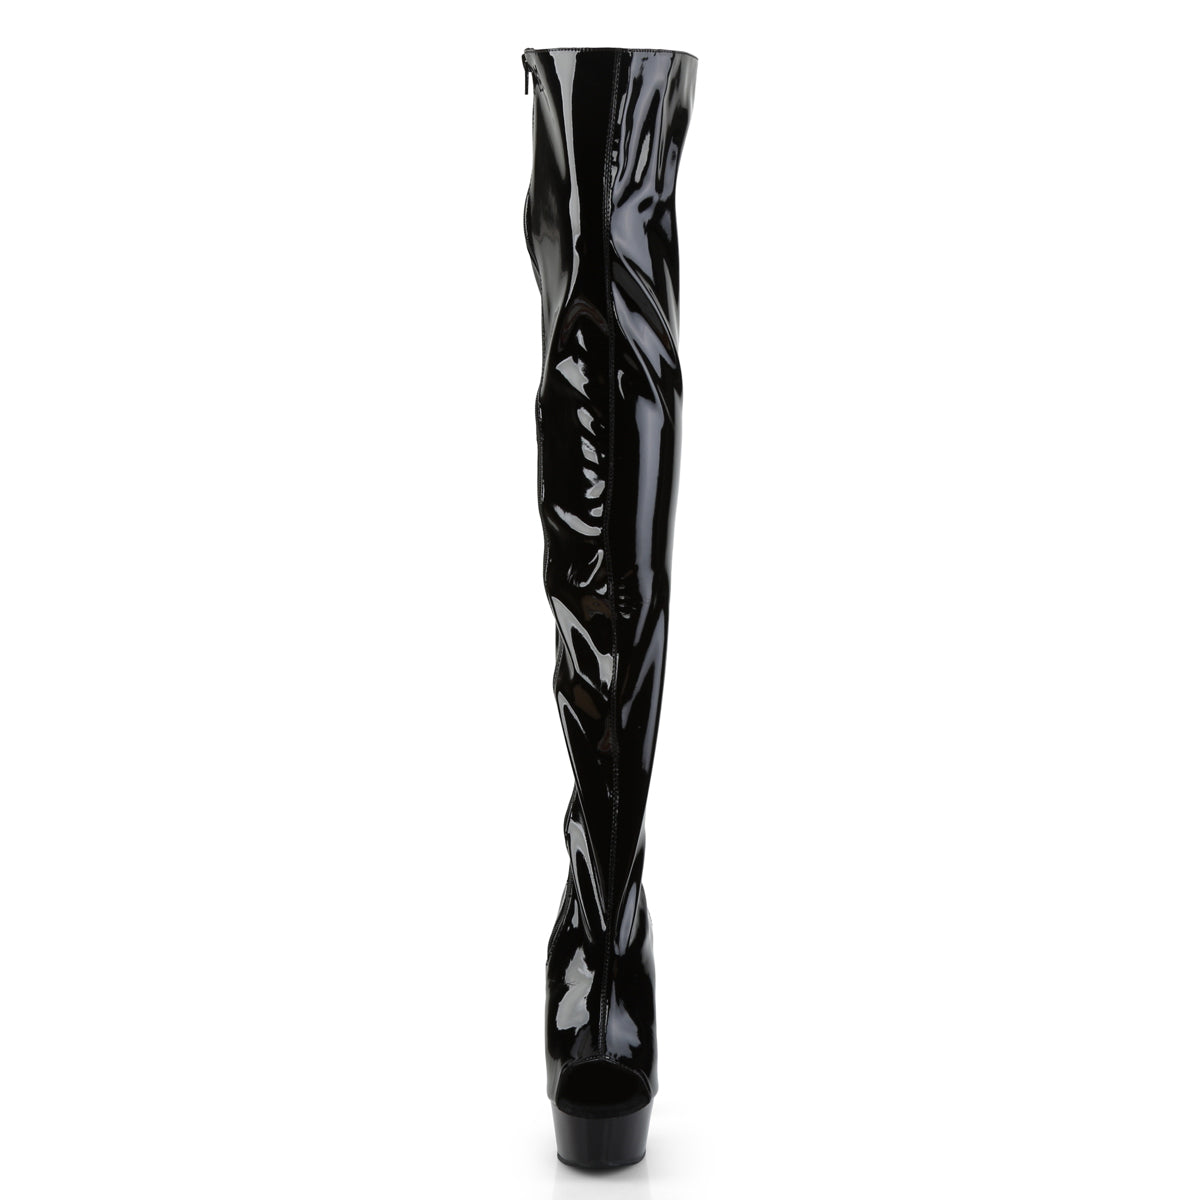 DELIGHT-3017 6" Heel Black Stretch Patent Pole Dancer Boots-Pleaser- Sexy Shoes Alternative Footwear